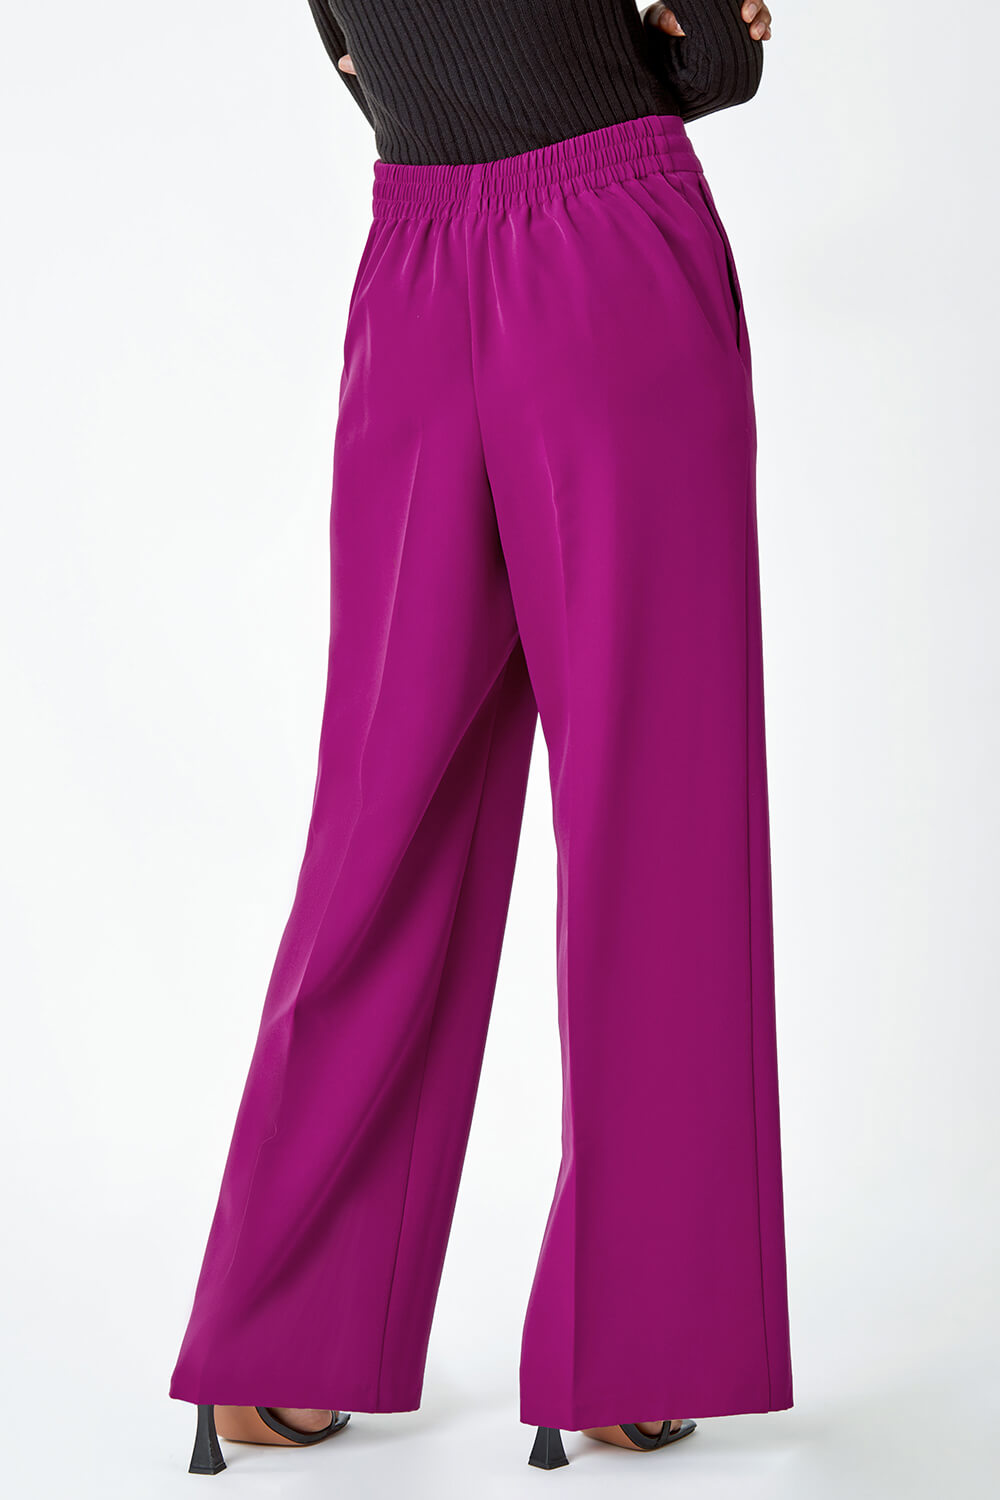 MAGENTA Wide Leg Tie Front Stretch Trouser, Image 5 of 7